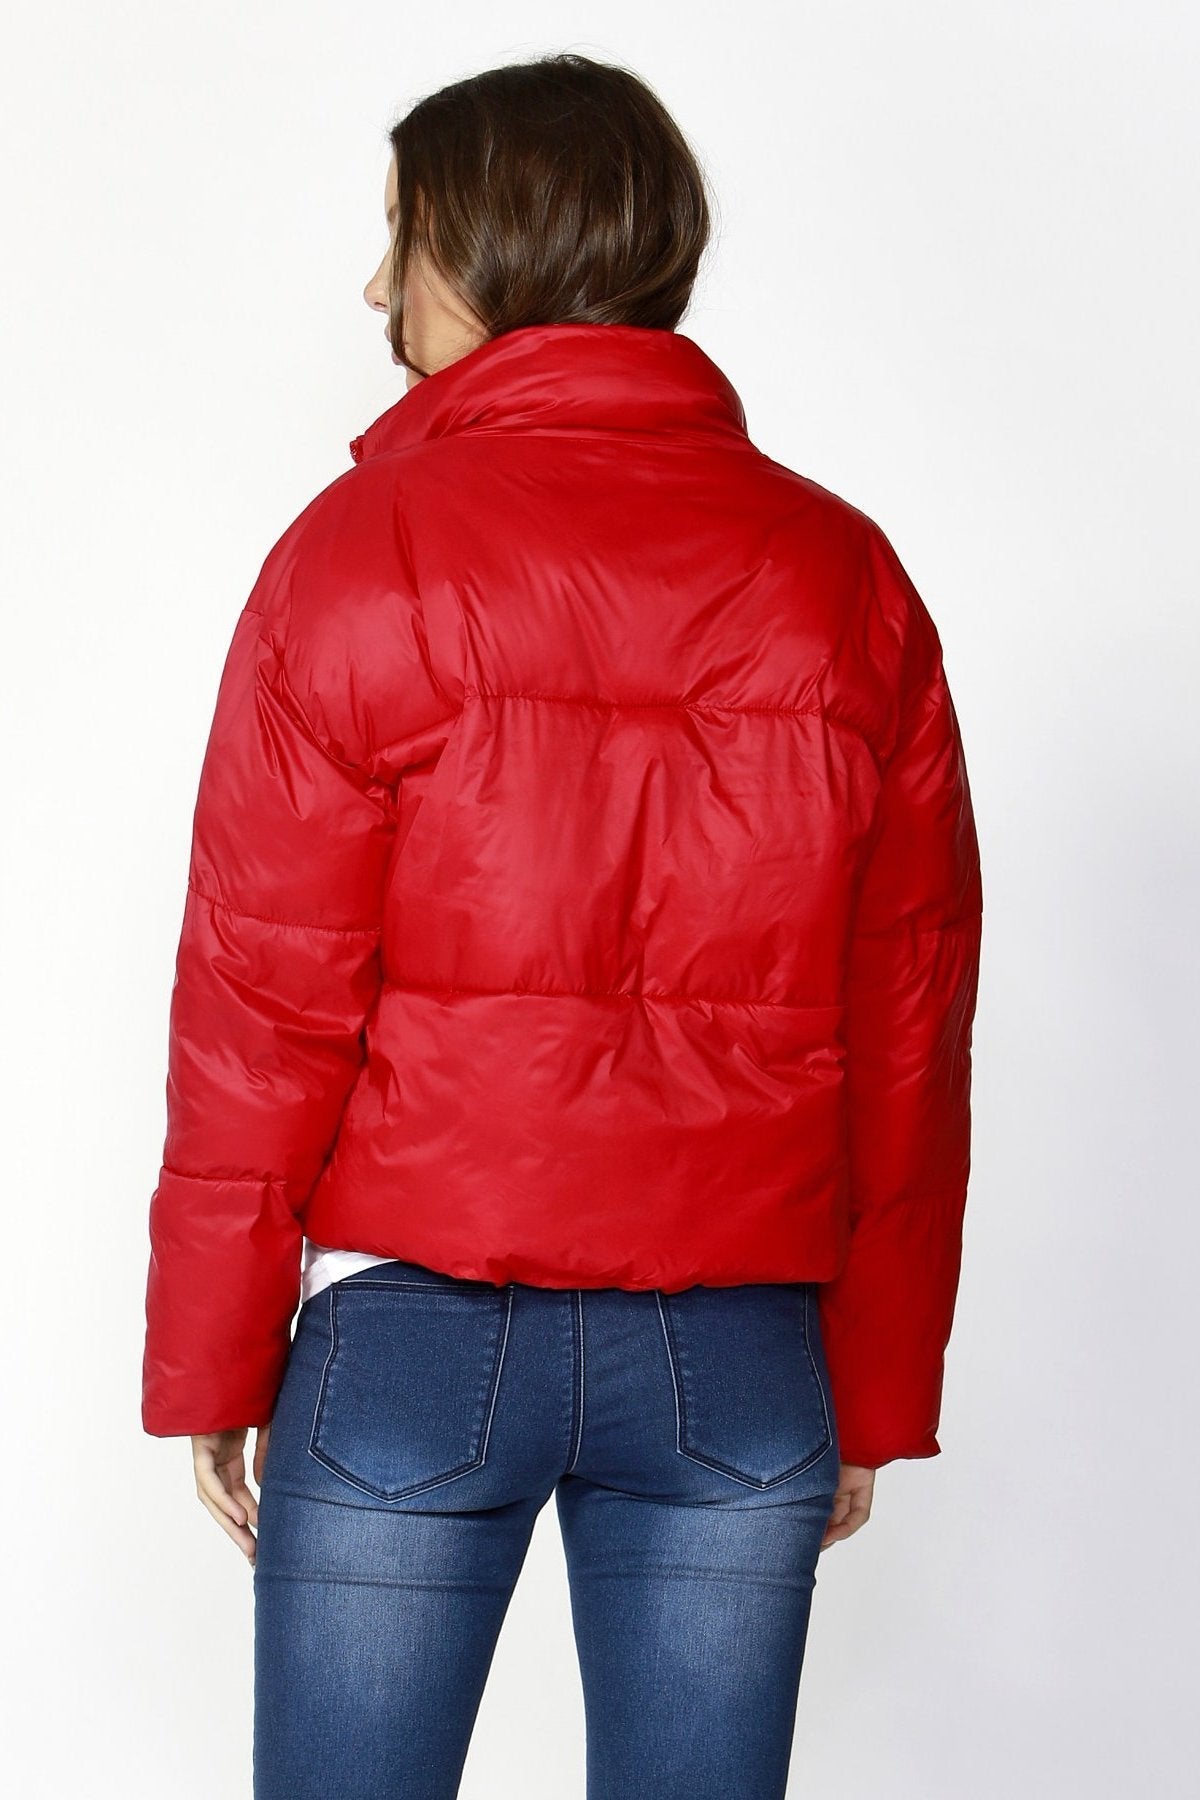 Betty Basics Dylan Cropped Puffer Jacket in Lava Red - Hey Sara